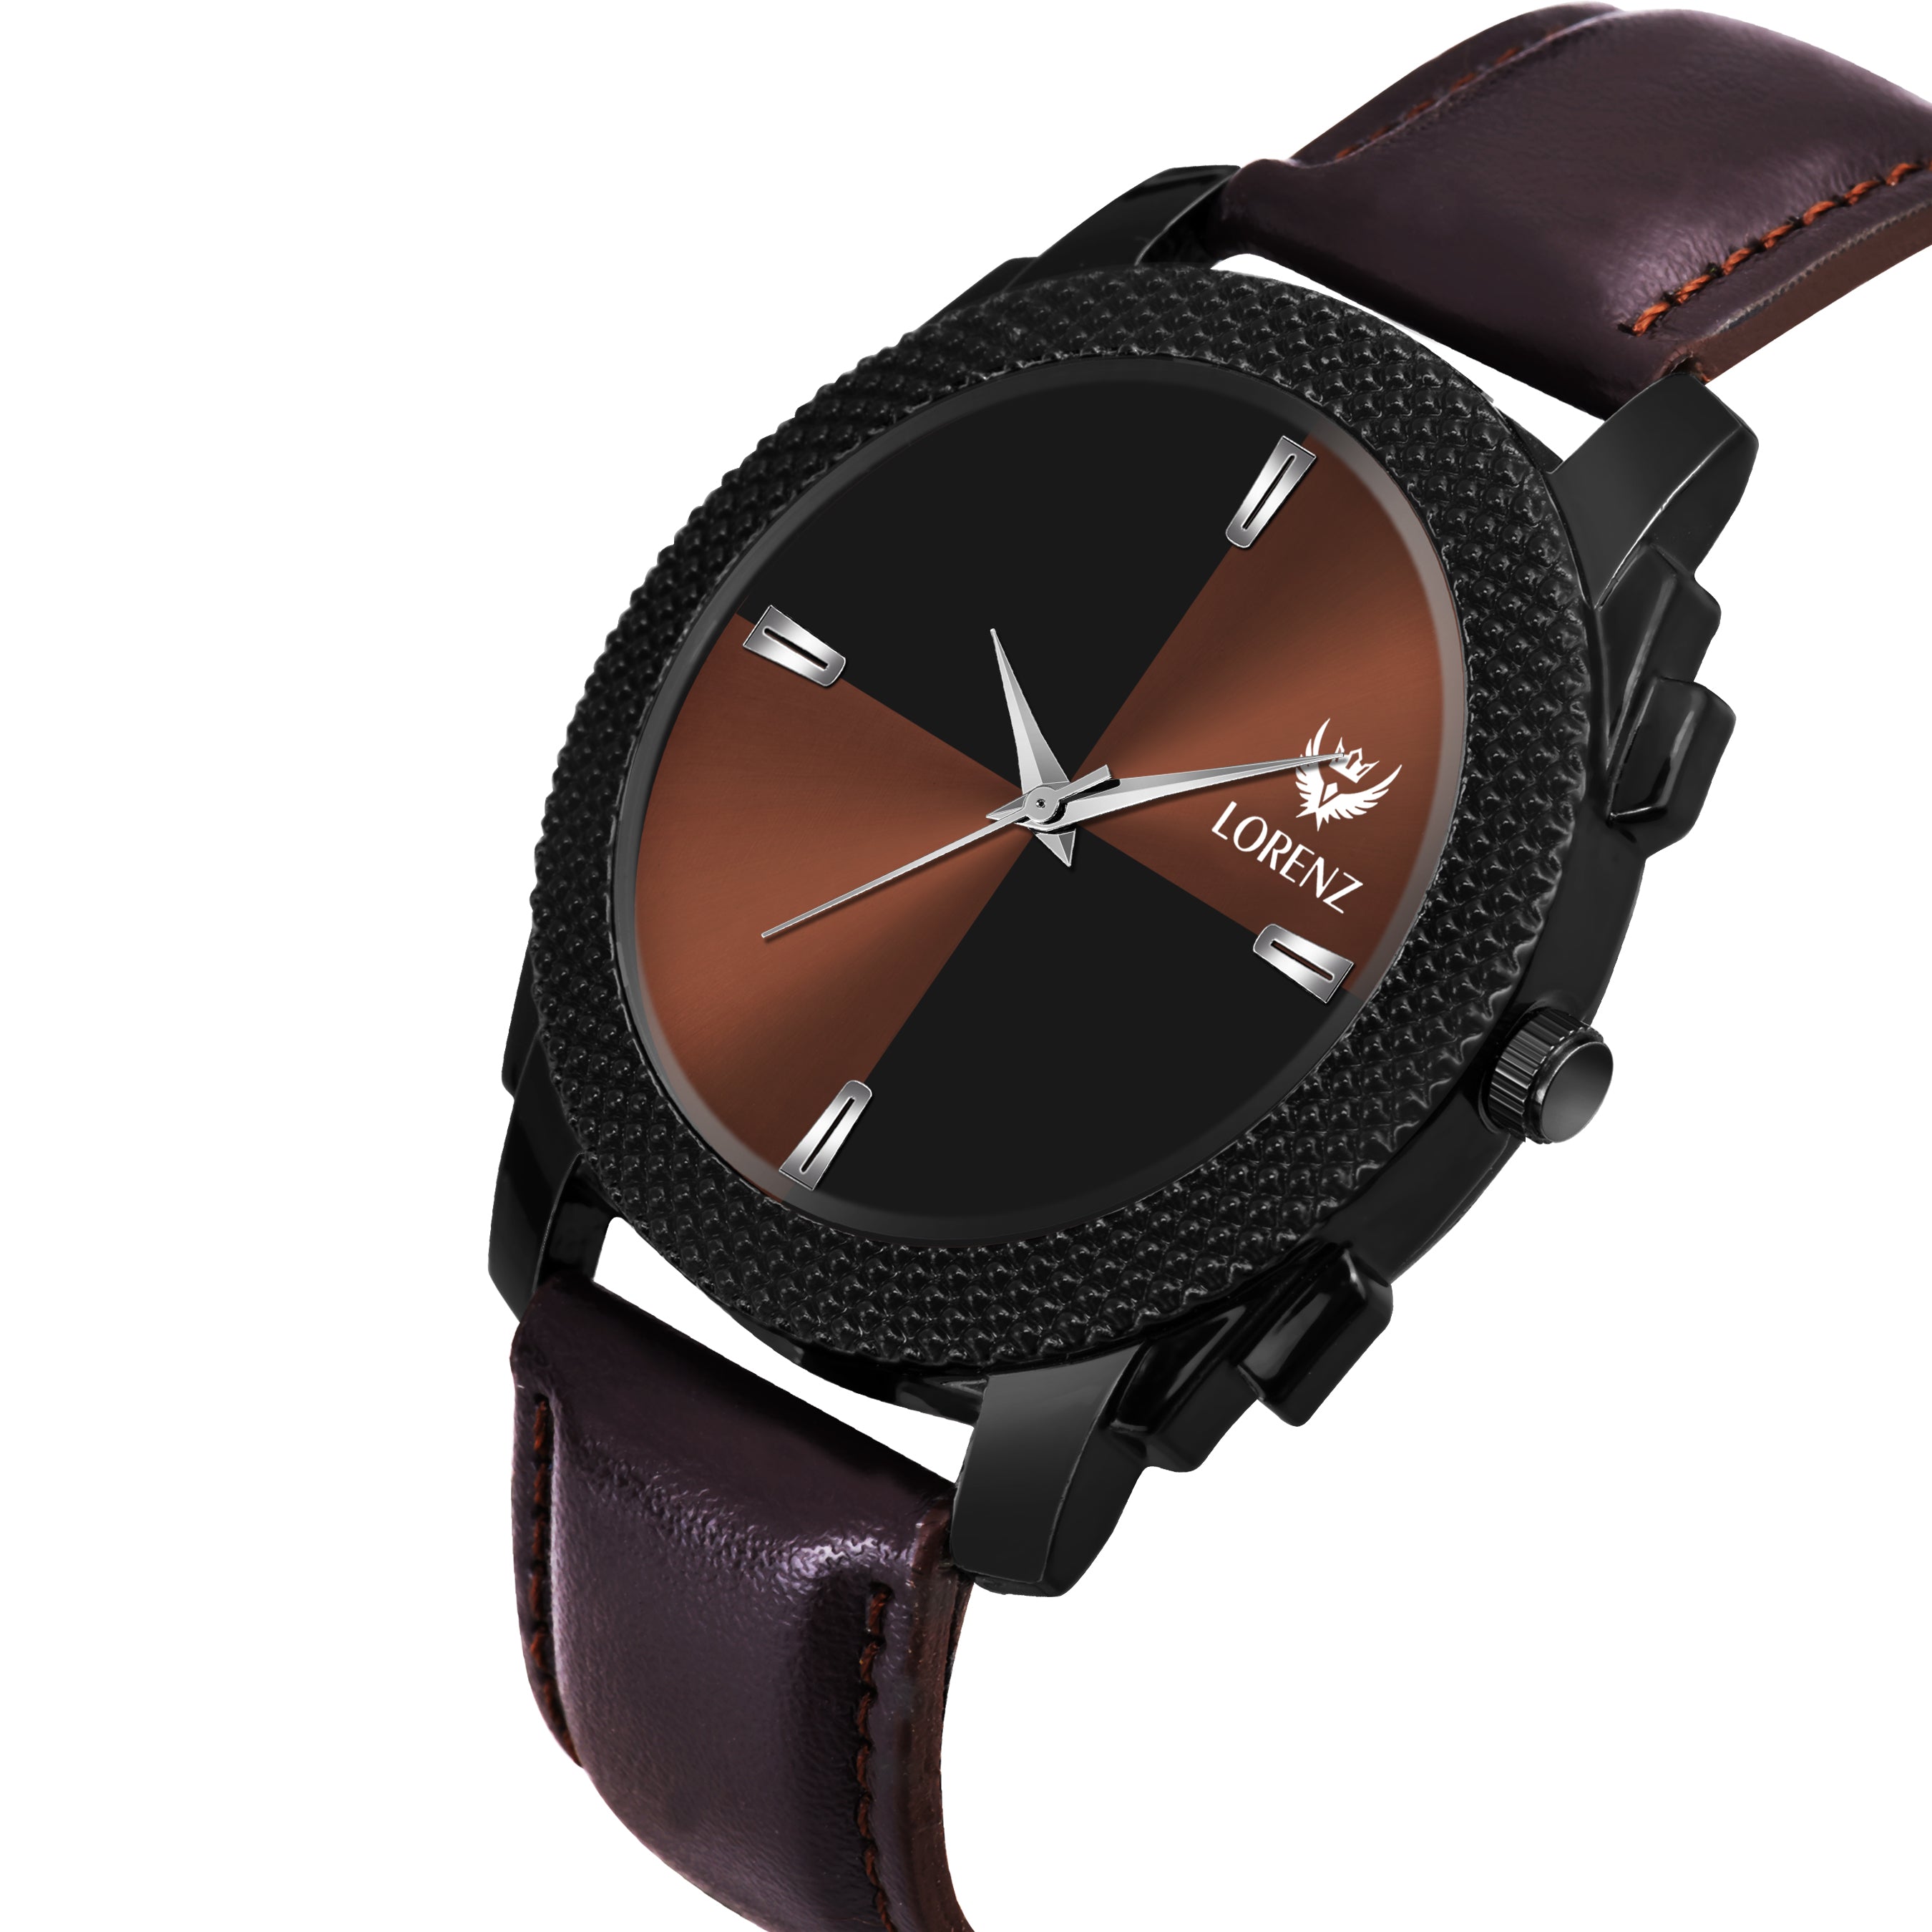  Black Dial Brown Leather Strap Watch 